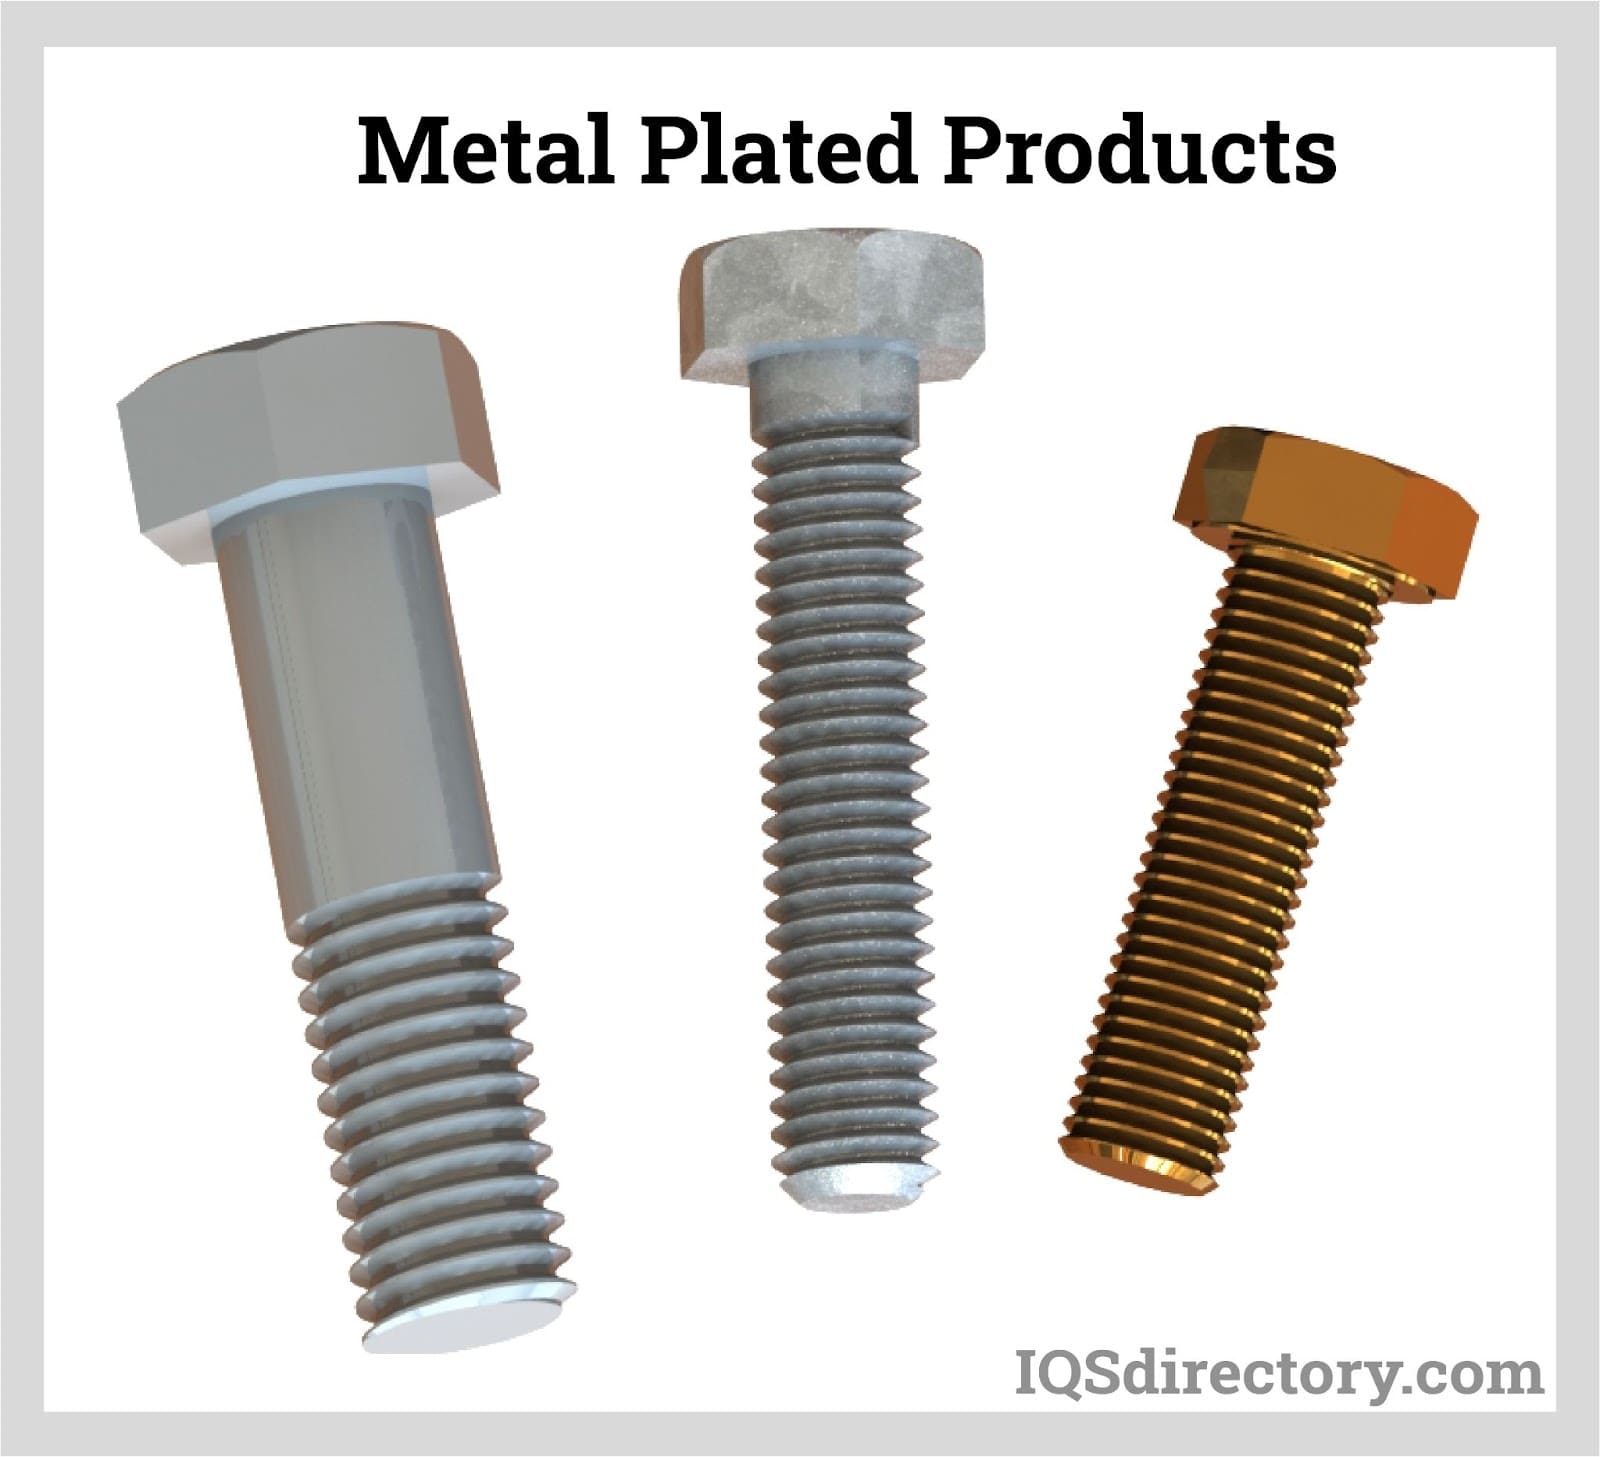 Metal Plated Products